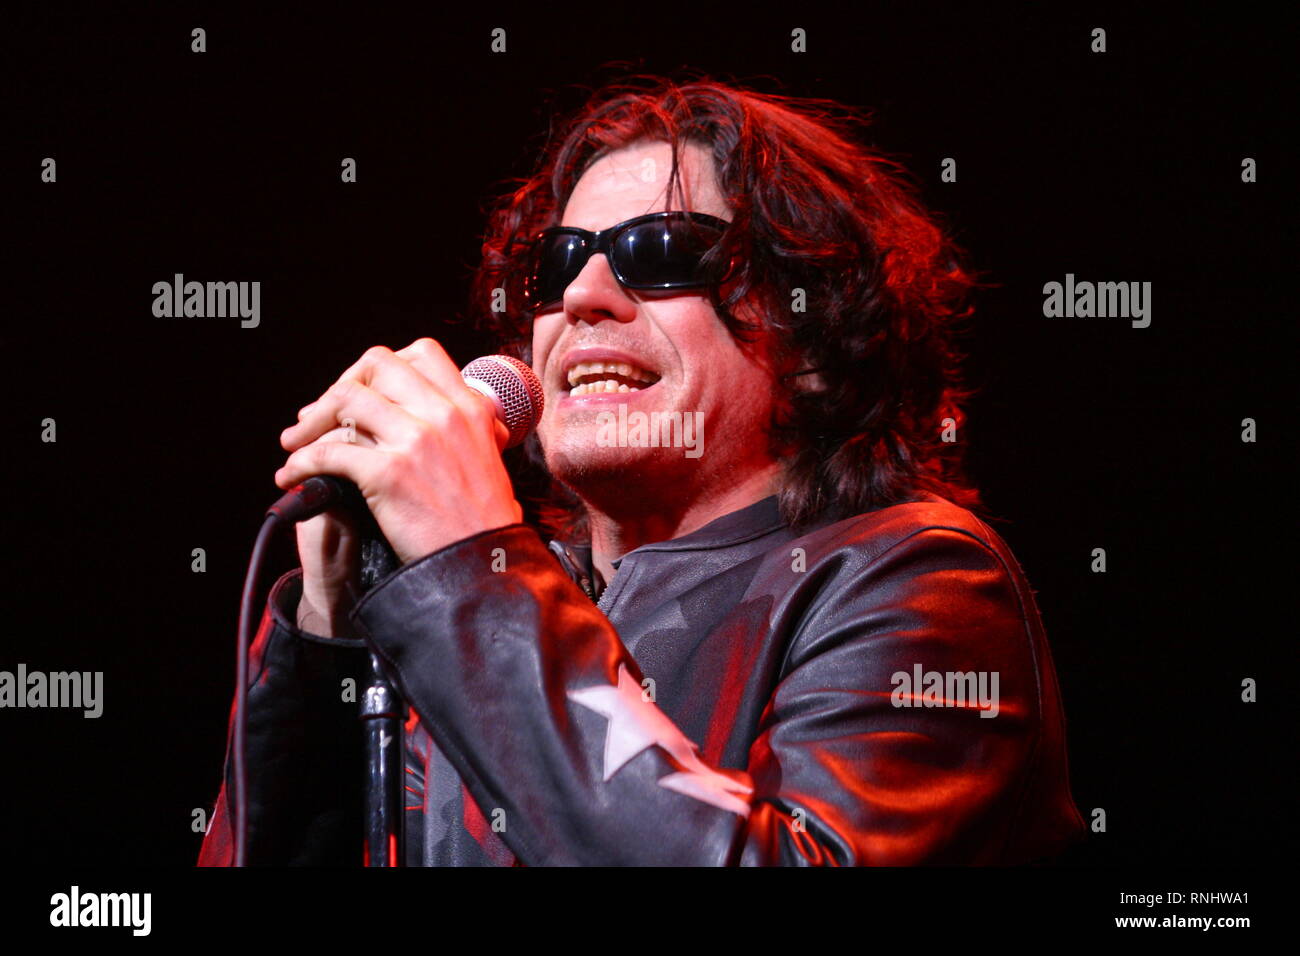 Singer Ian Astbury is shown performing on stage during a live concert appearance with The Doors. Stock Photo